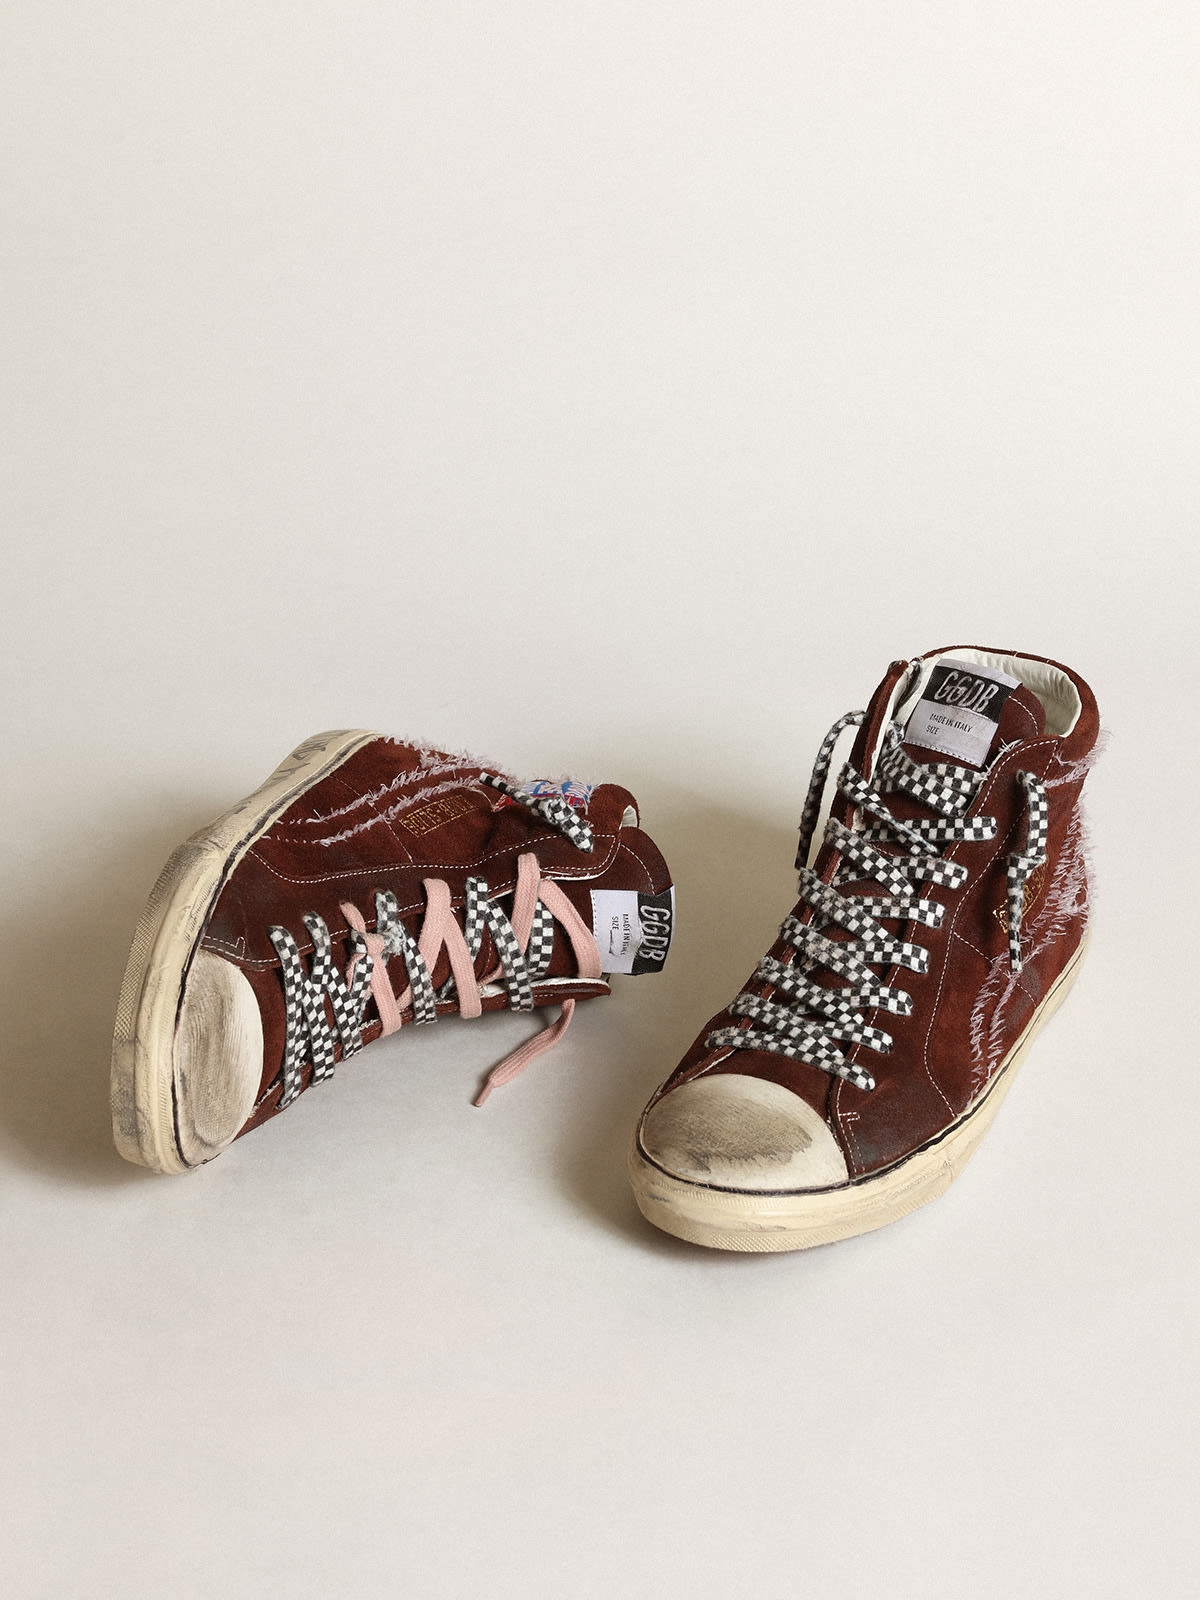 Golden Goose - Slide sneakers in chocolate-colored suede with white stitching on the star and flash in 